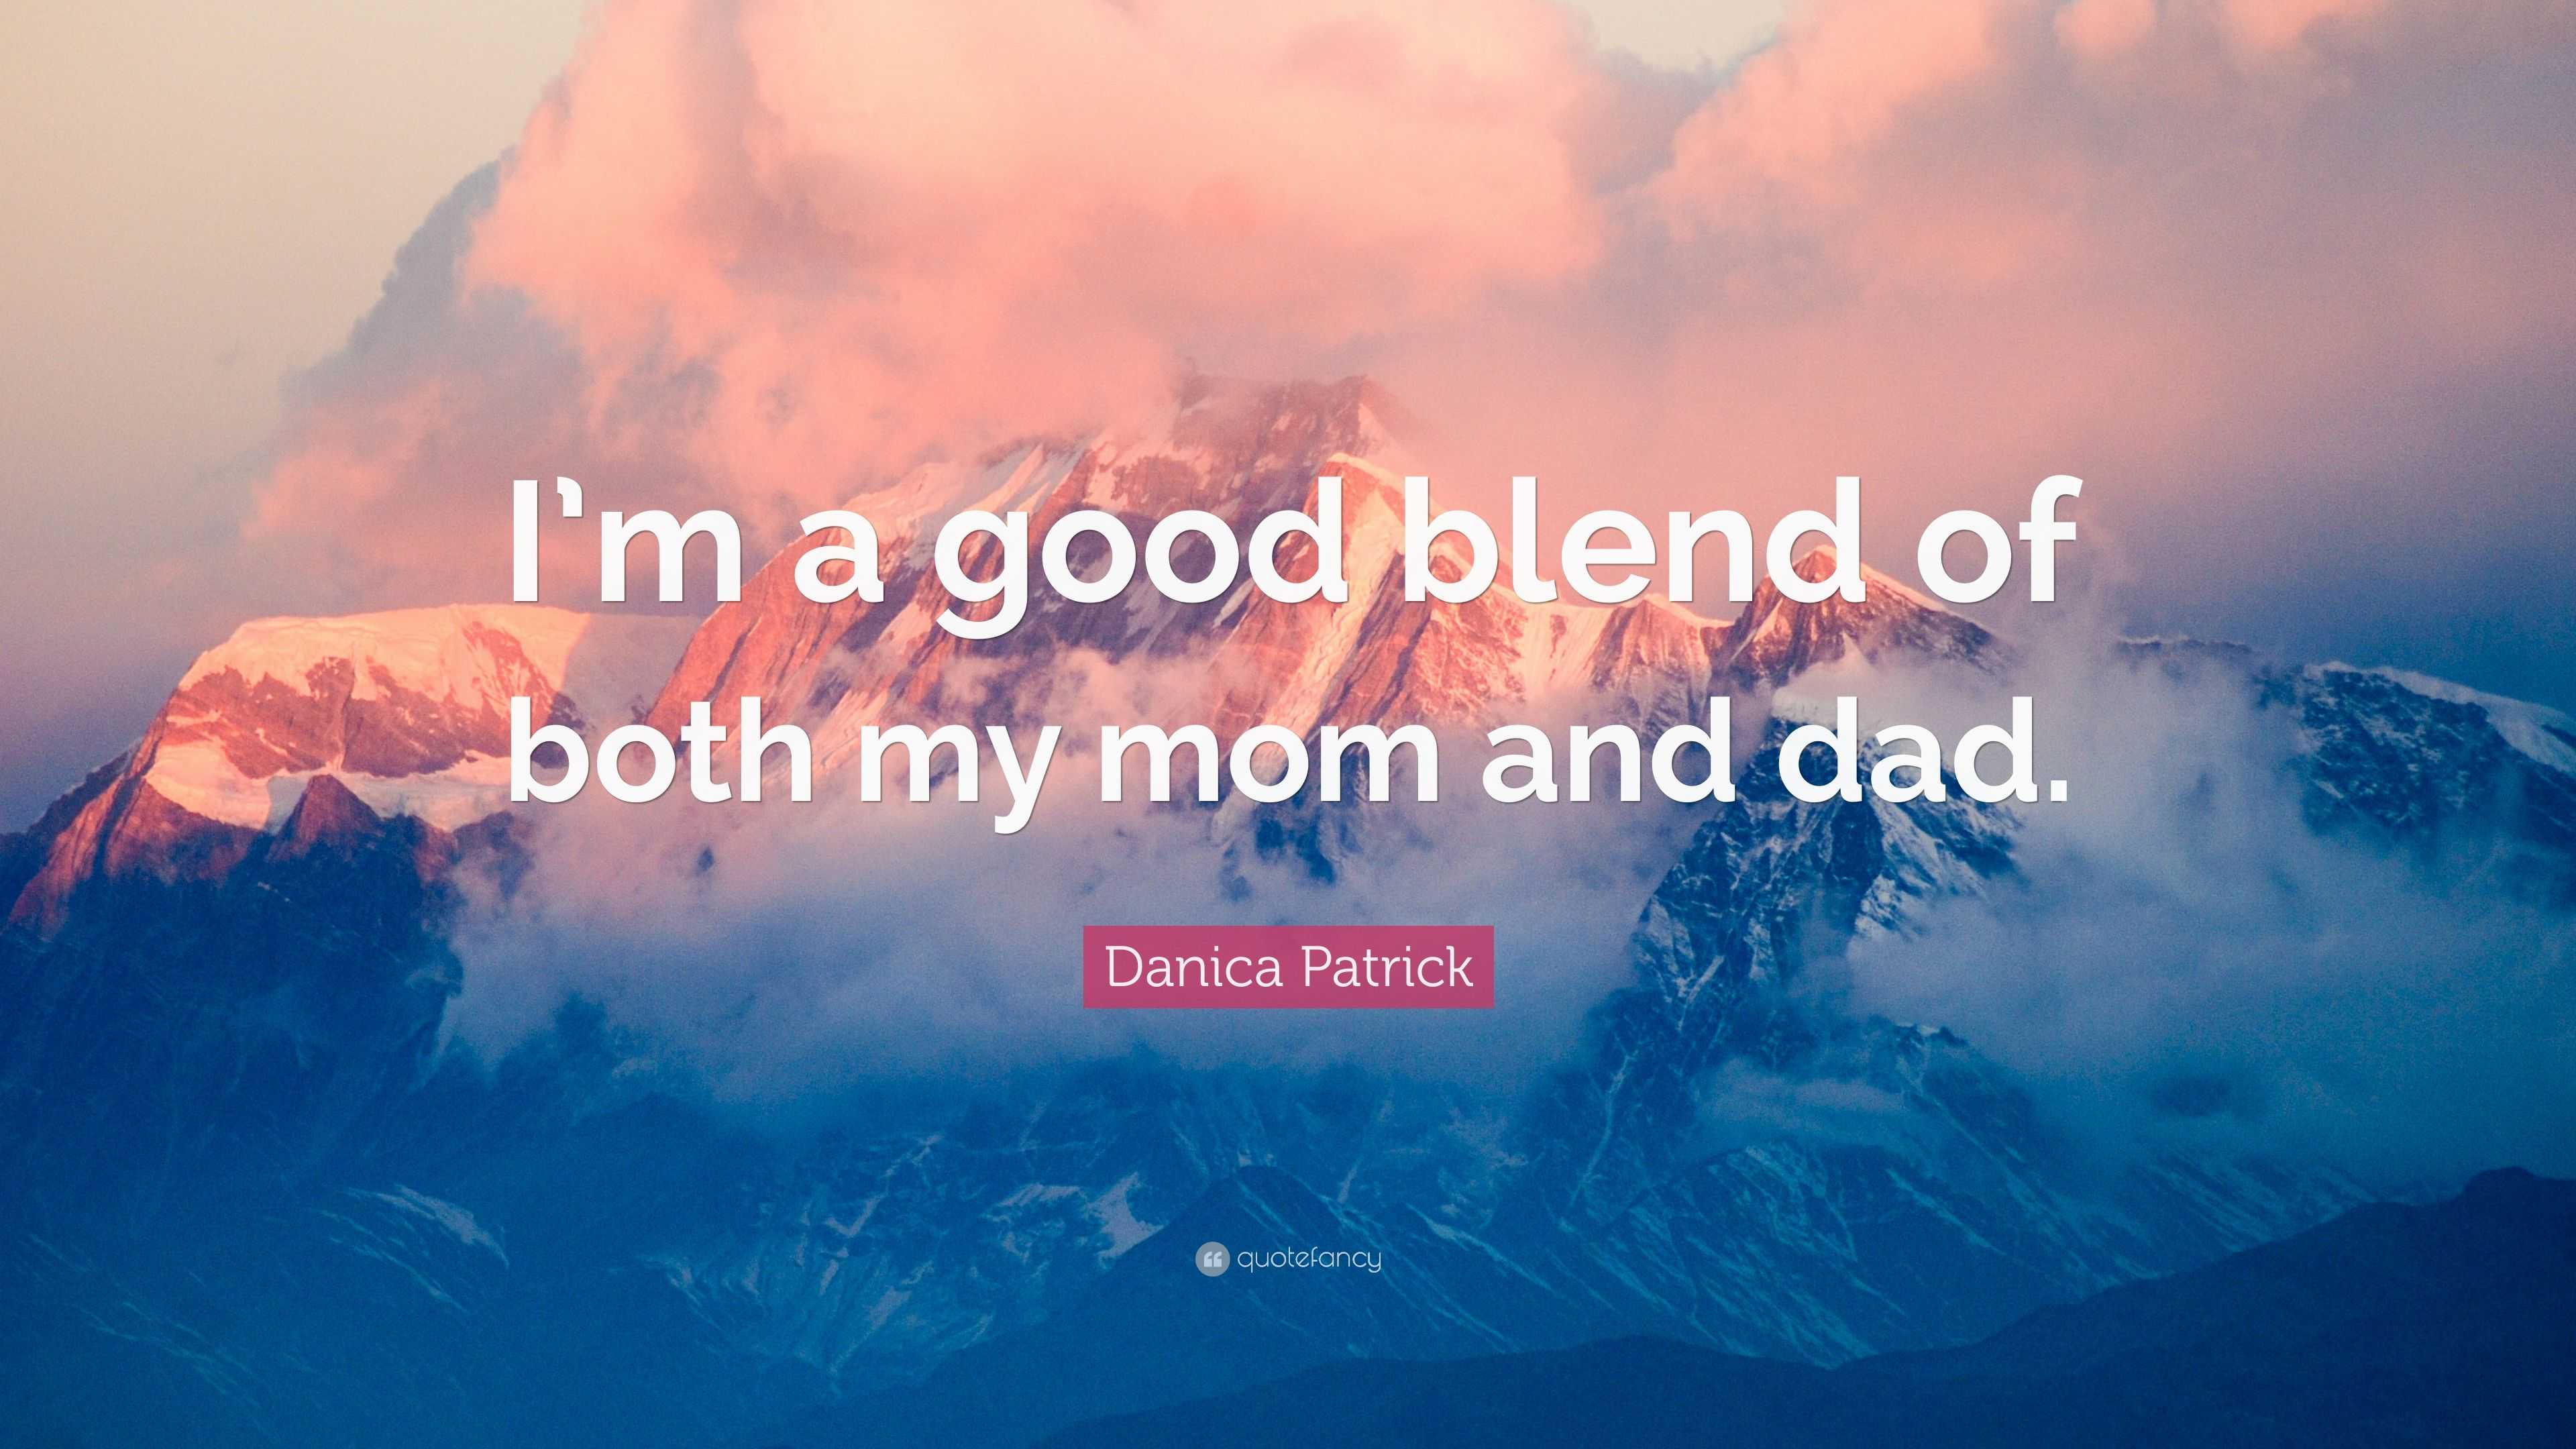 Danica Patrick Quote I M A Good Blend Of Both My Mom And Dad Images, Photos, Reviews